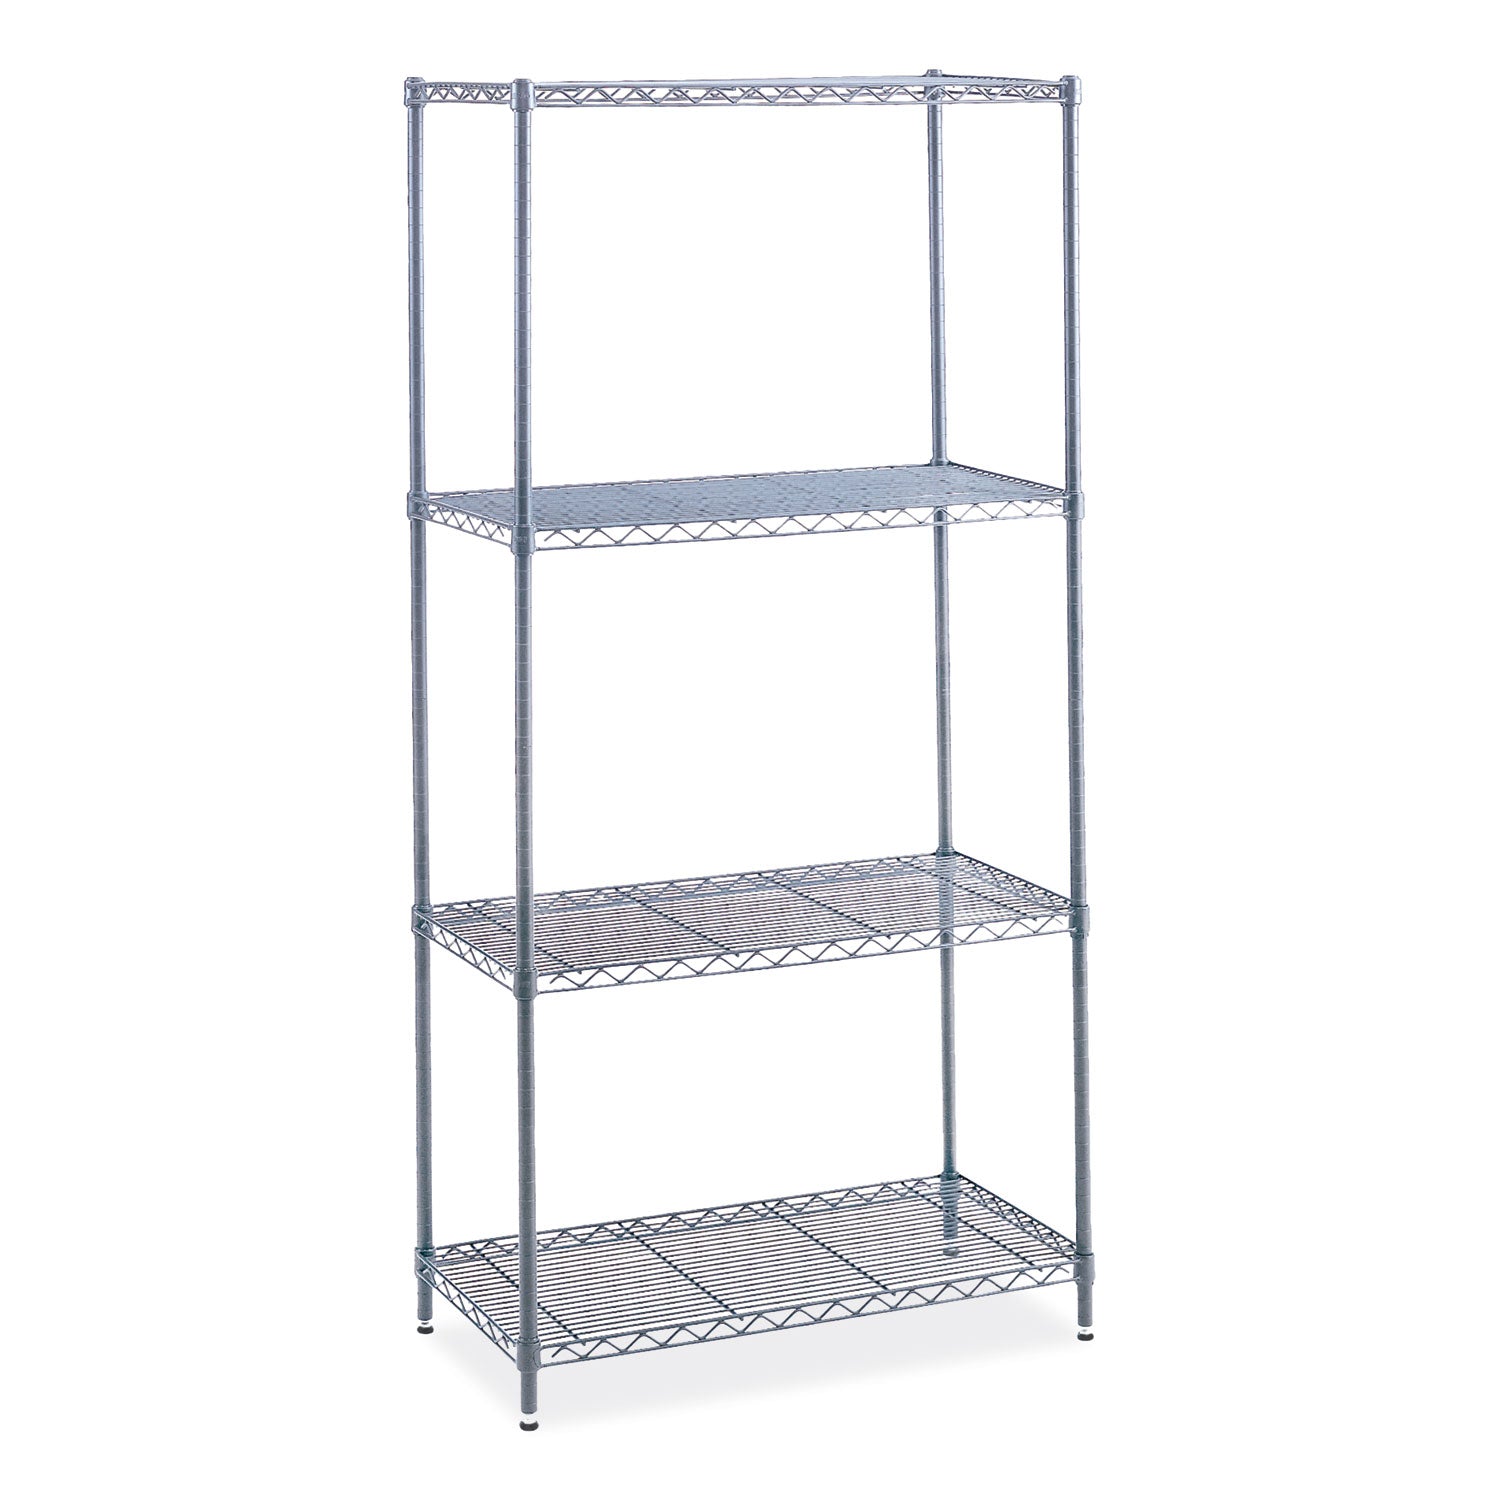 industrial-wire-shelving-four-shelf-48w-x-18d-x-72h-metallic-gray-ships-in-1-3-business-days_saf5291gr - 1